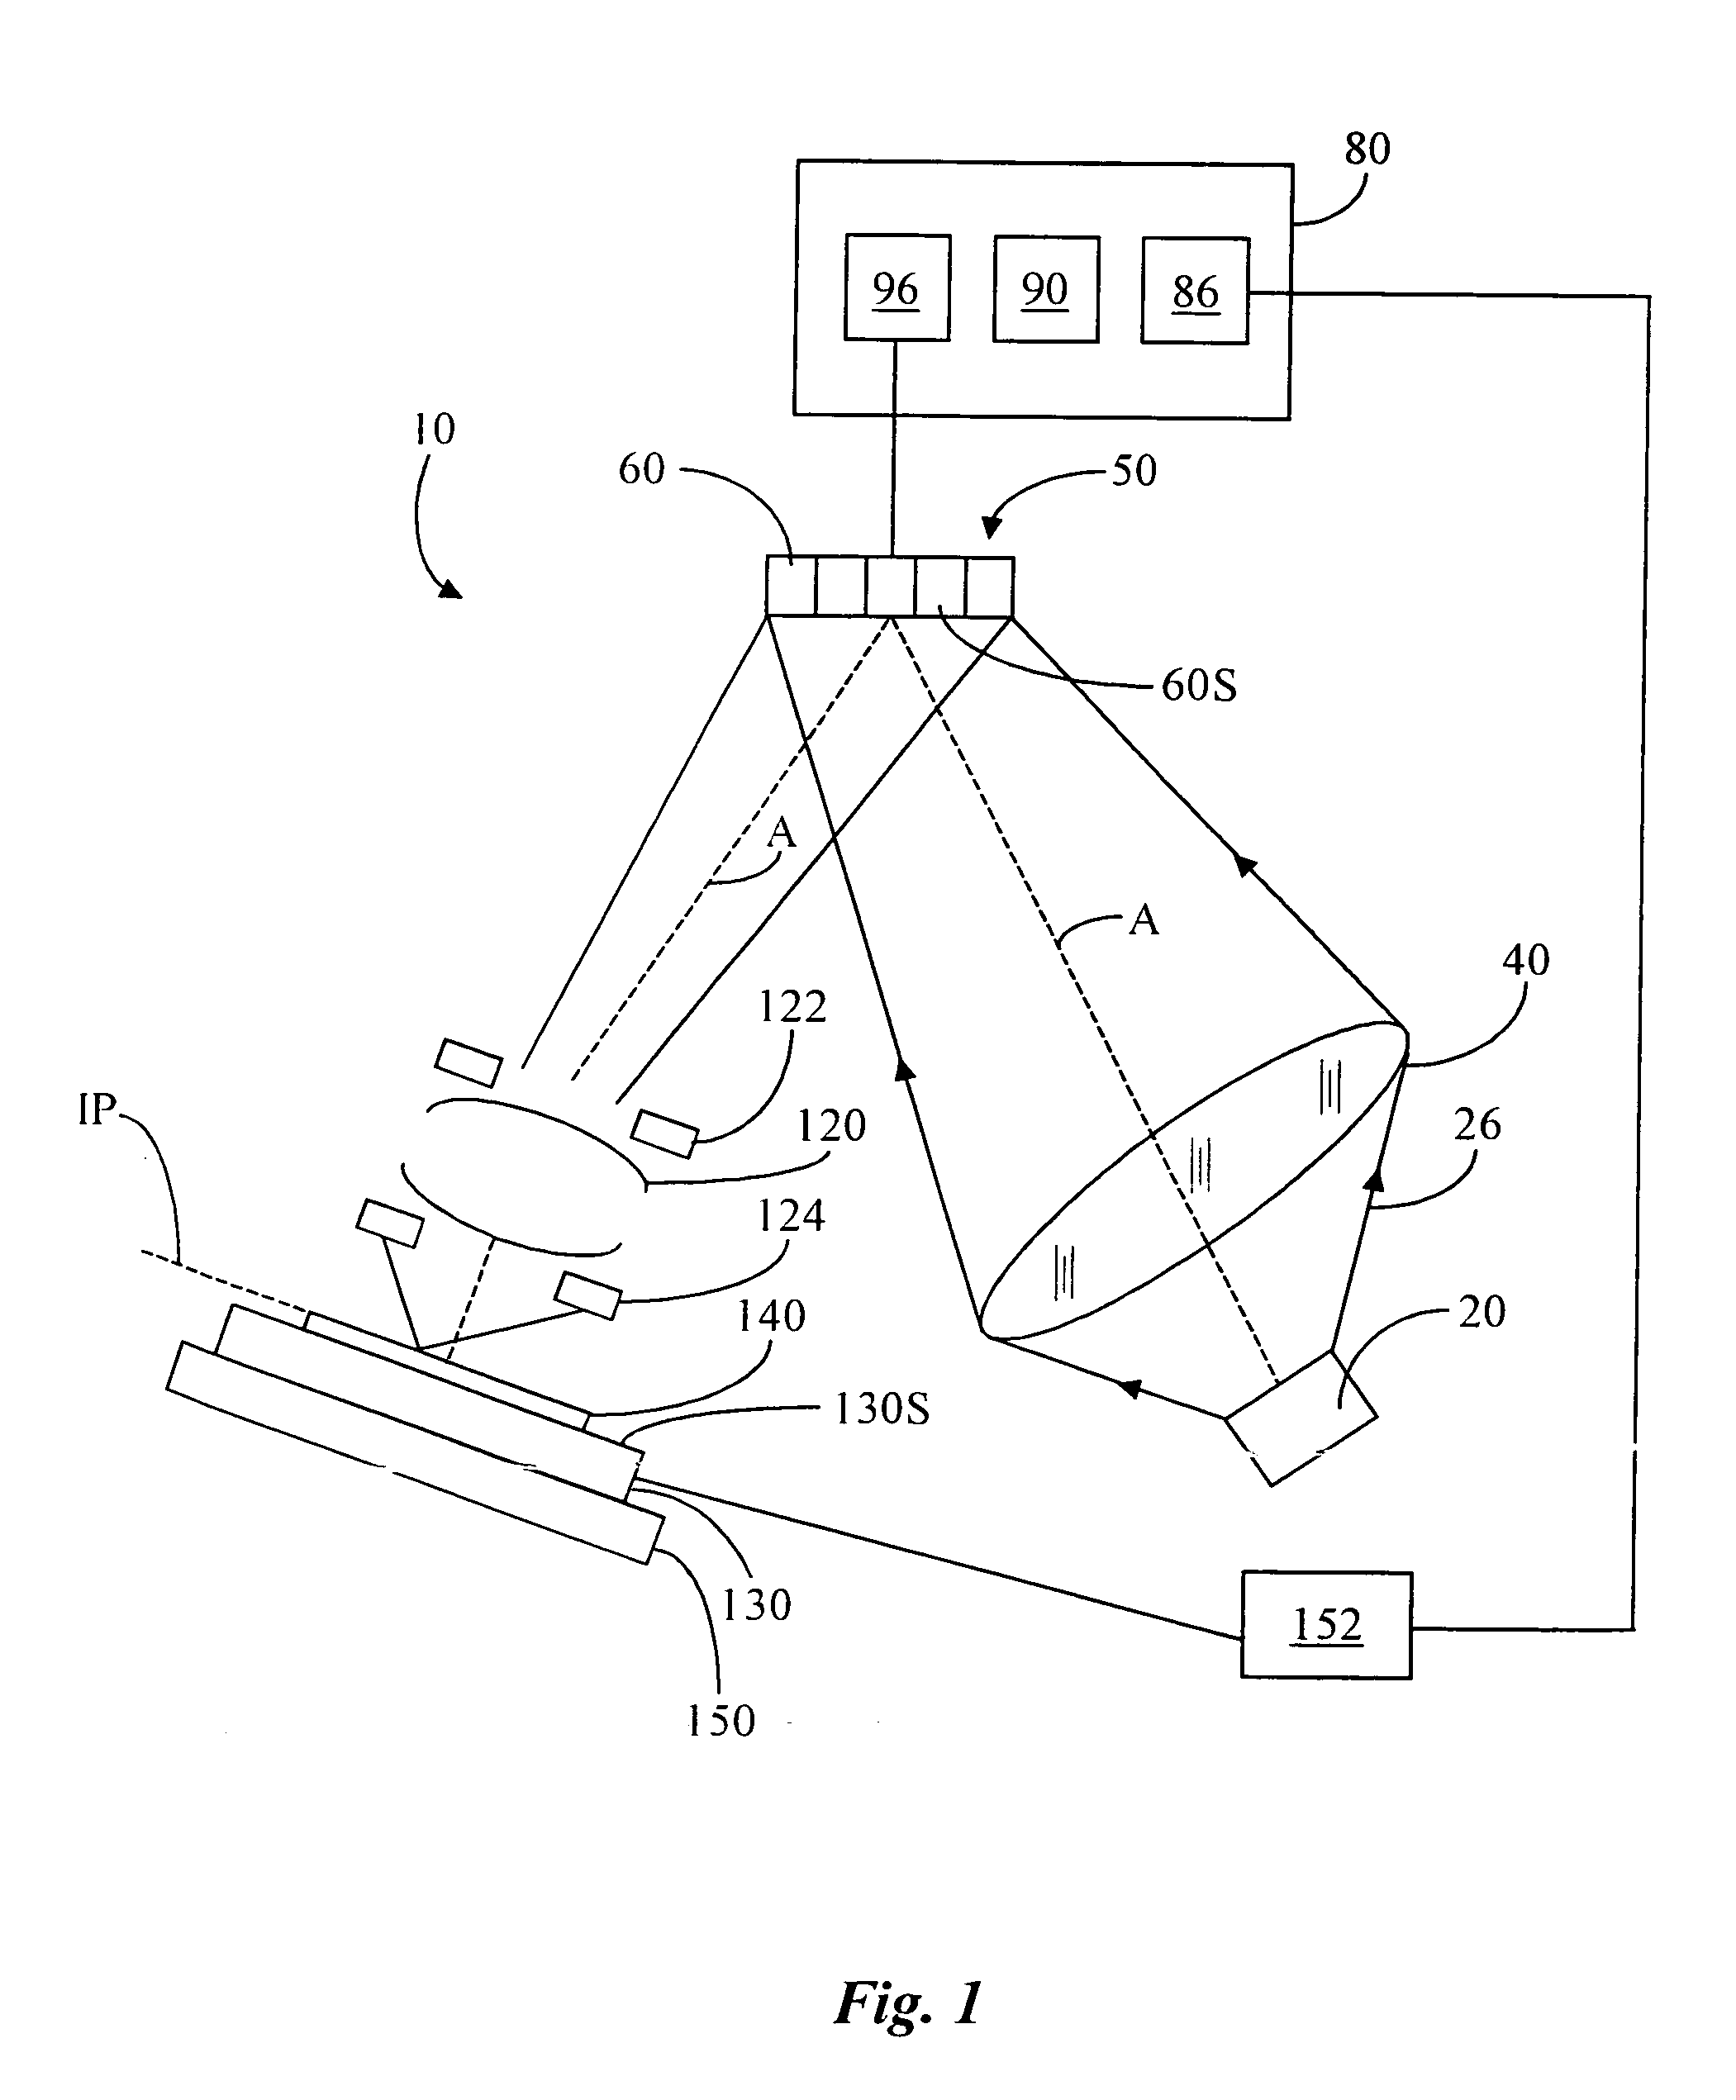 Computer architecture for and method of high-resolution imaging using a low-resolution image transducer